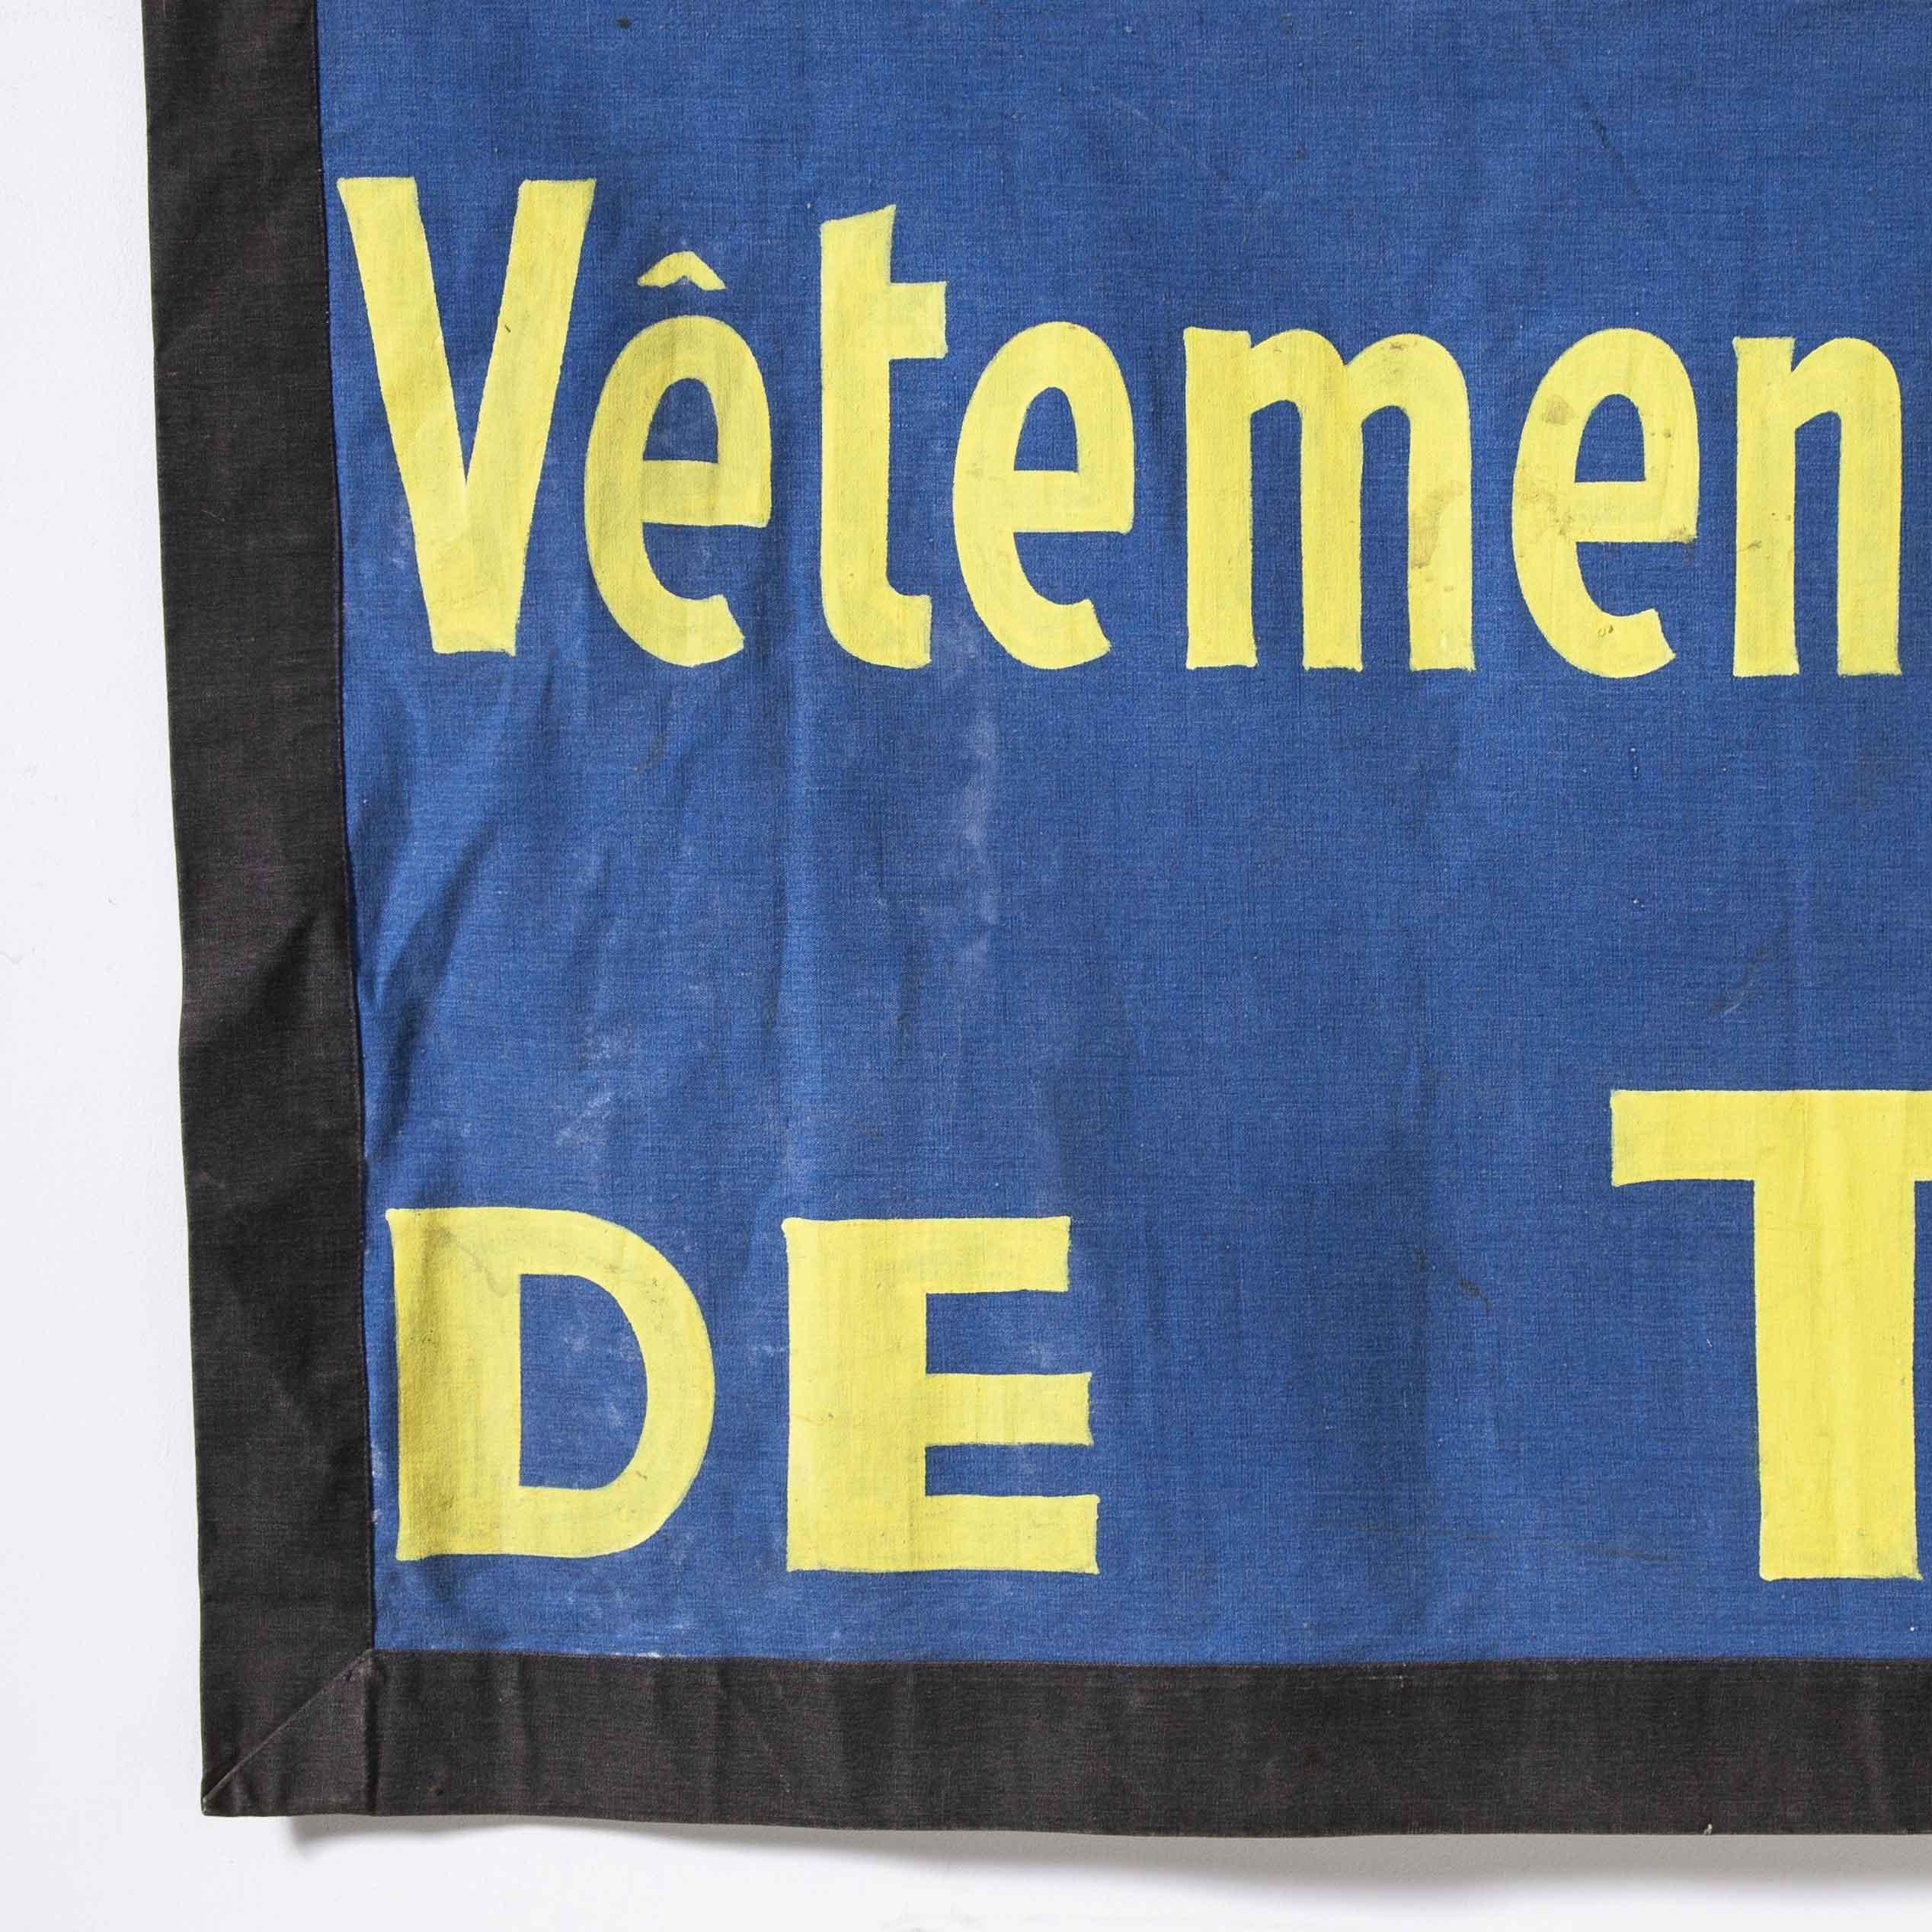 1950’s blue & yellow canvas advertising banner – L’Ascenseur

1950’s blue & yellow canvas advertising banner – L’Ascenseur. Superb original 1950’s advertising banner for clothing work wear. The banner would have been displayed on market stalls at